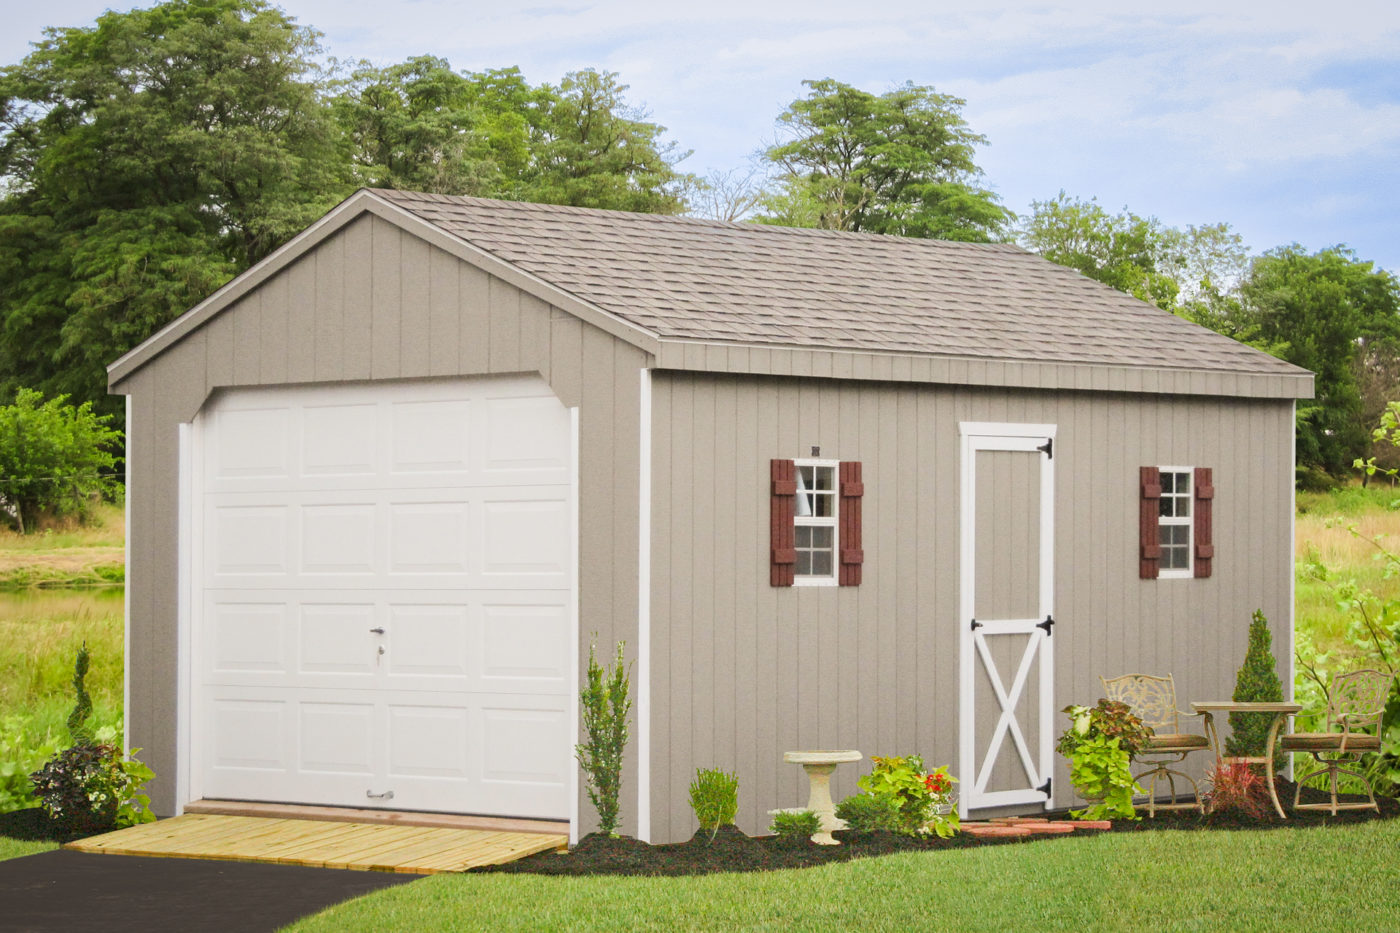 A Standard garage for sale from Sheds Unlimited